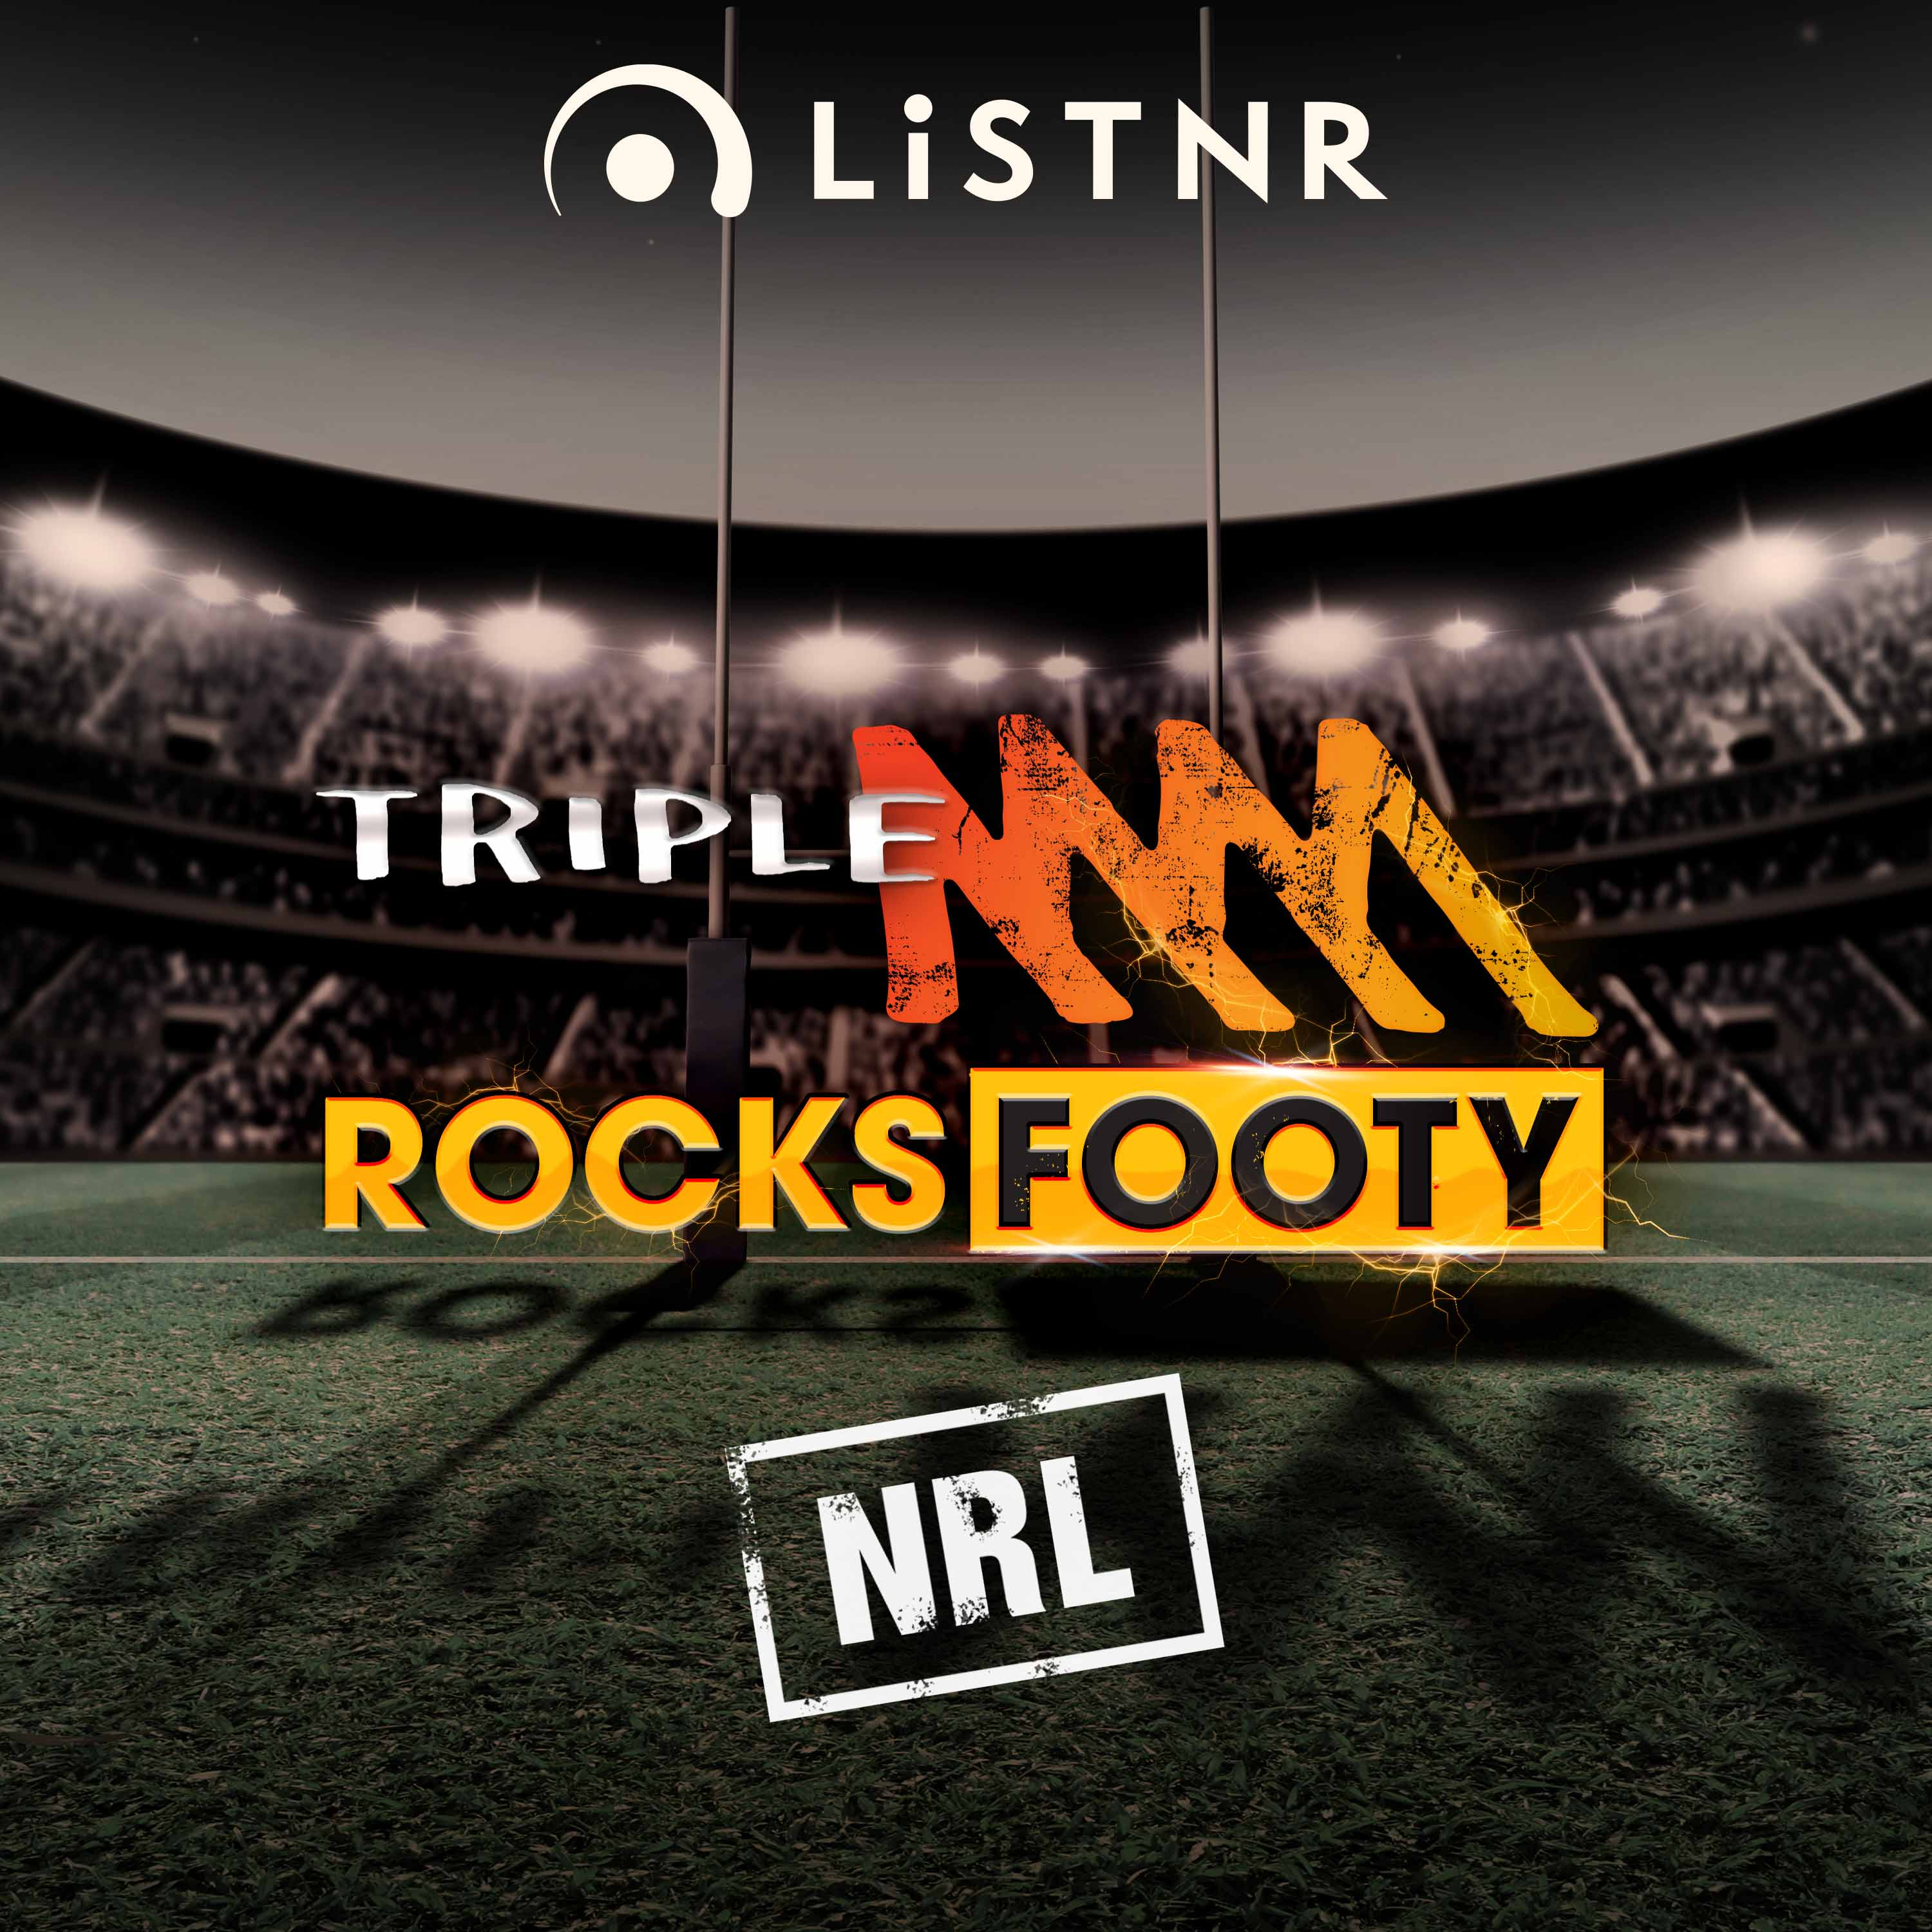 Are The Panthers Confident Or Cocky? | Triple M NRL's Thursday Night Footy Show